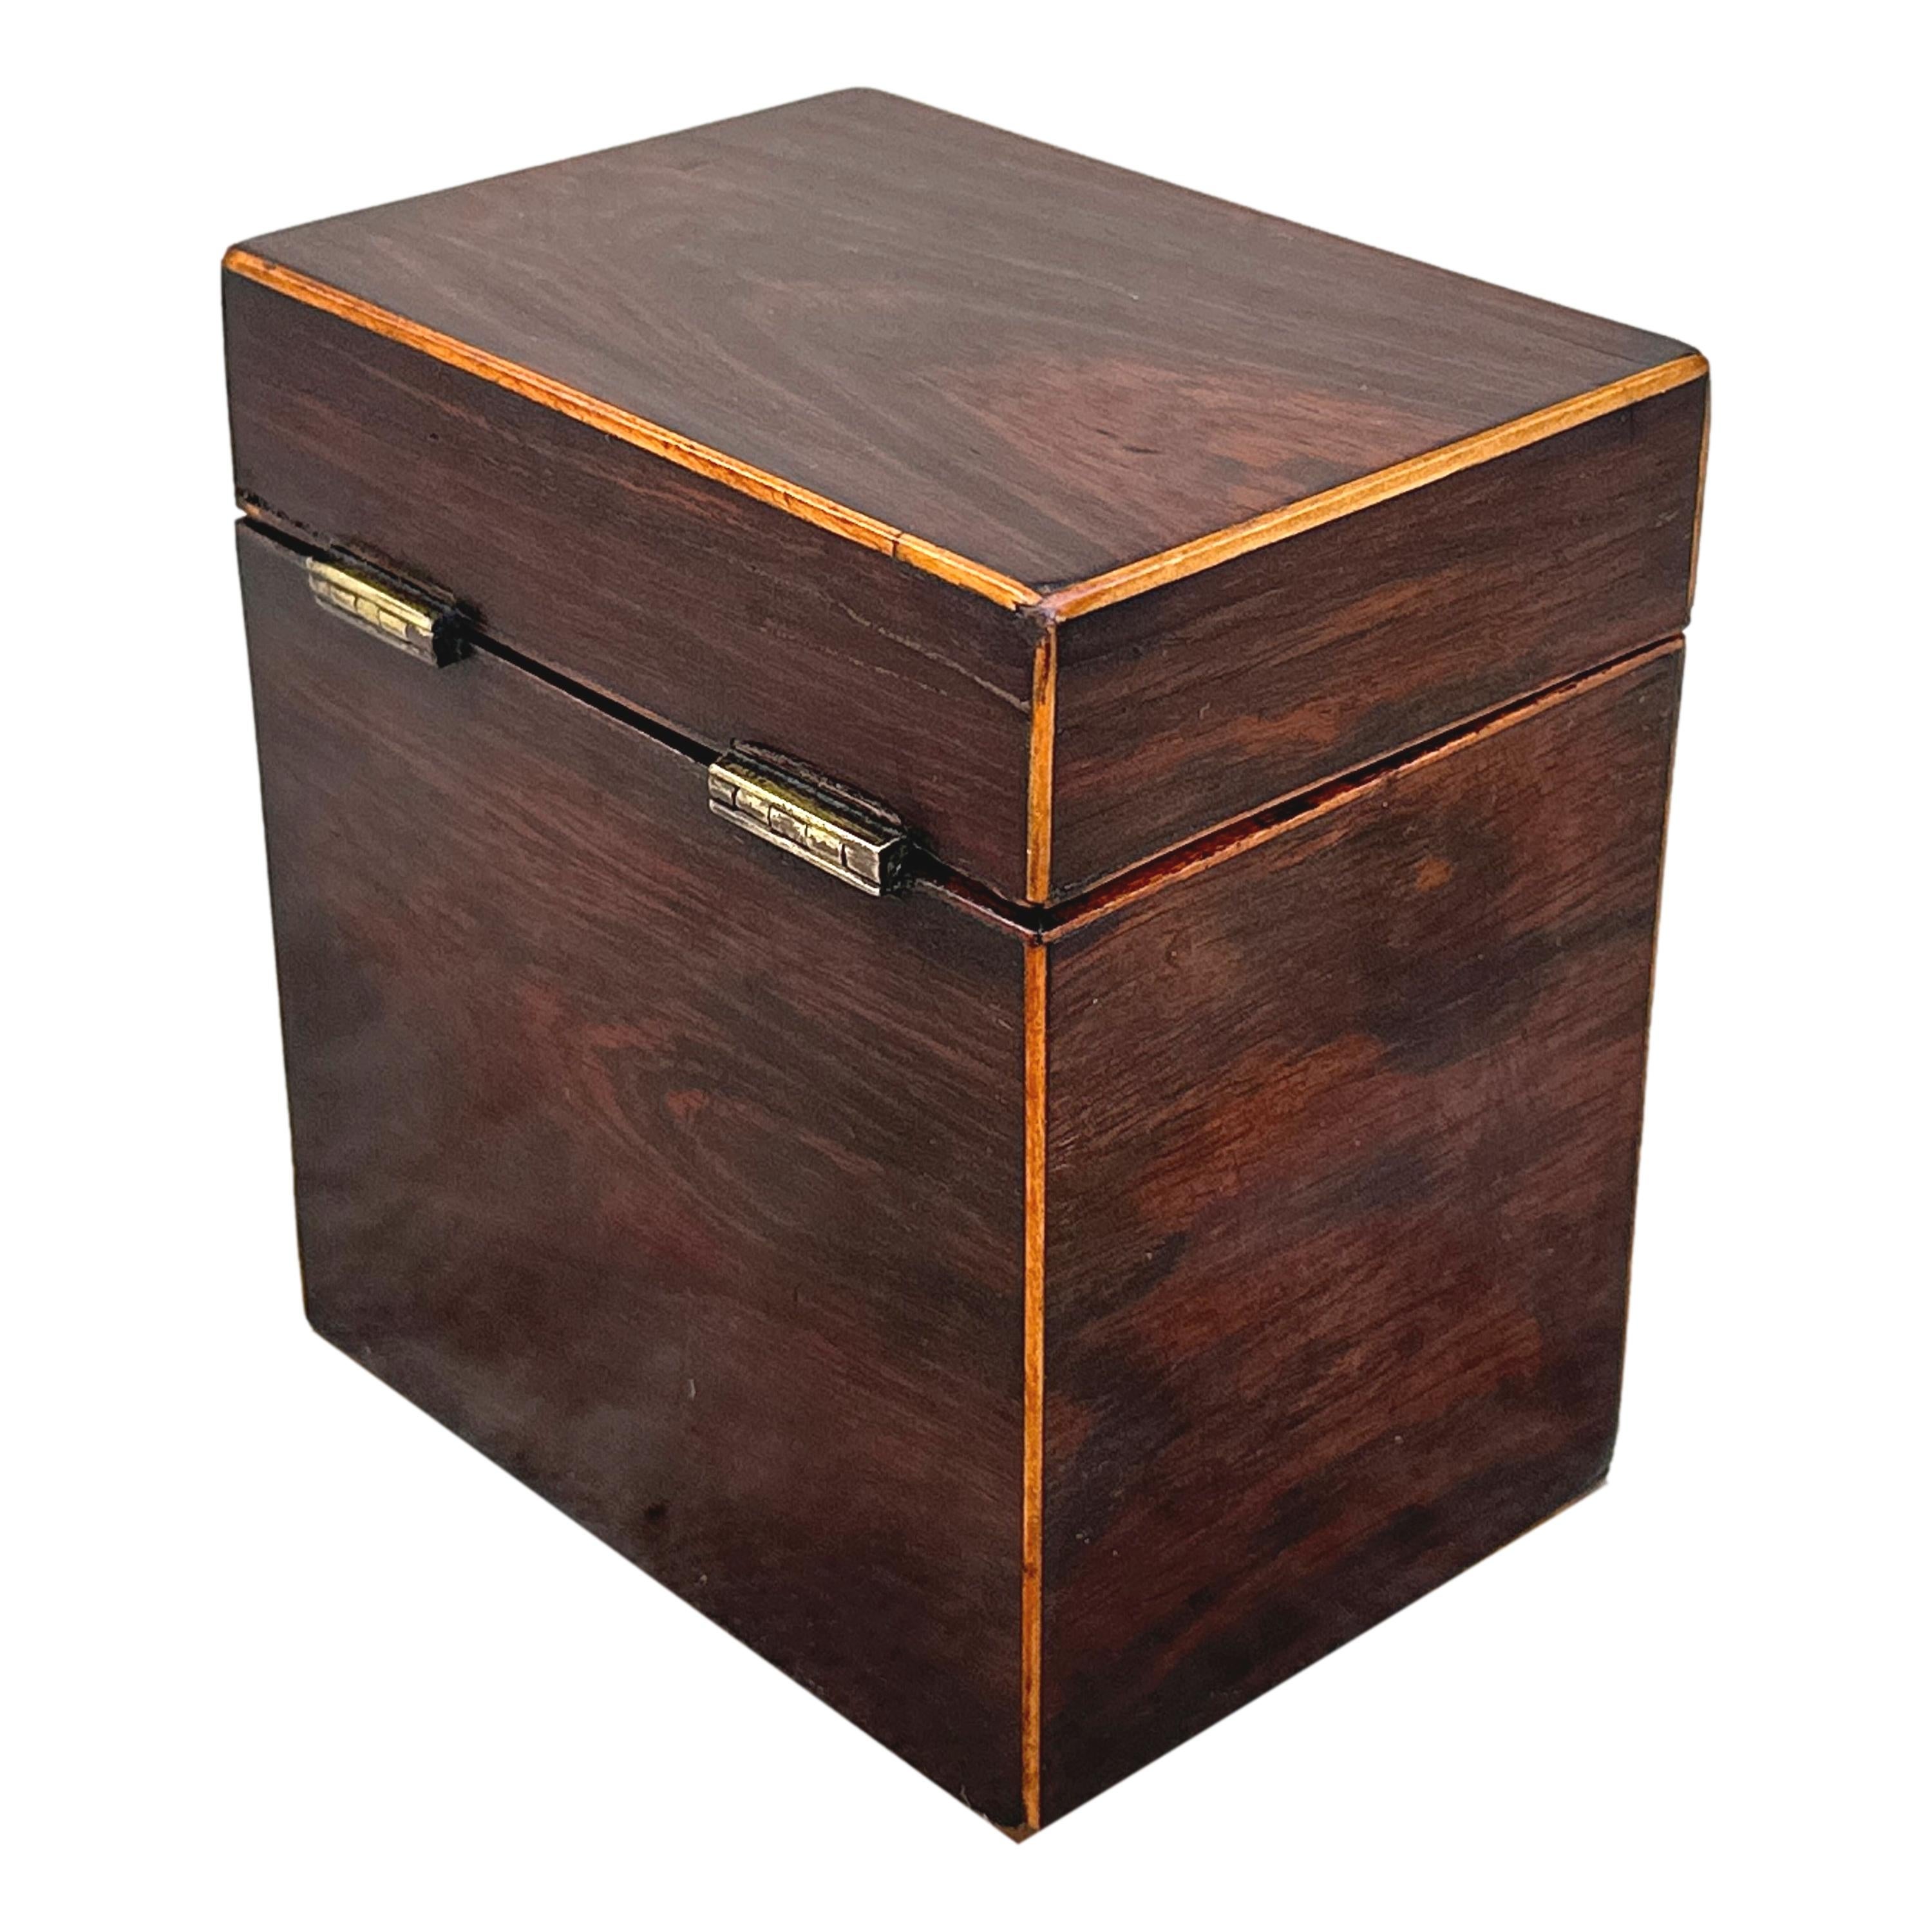 A very attractive, good quality, late 18th century rosewood oblong shaped tea caddy having satinwood strung mouldings and original brass hinges, with working lock and key.

Constructed using attractive rosewood timber which retains a good colour